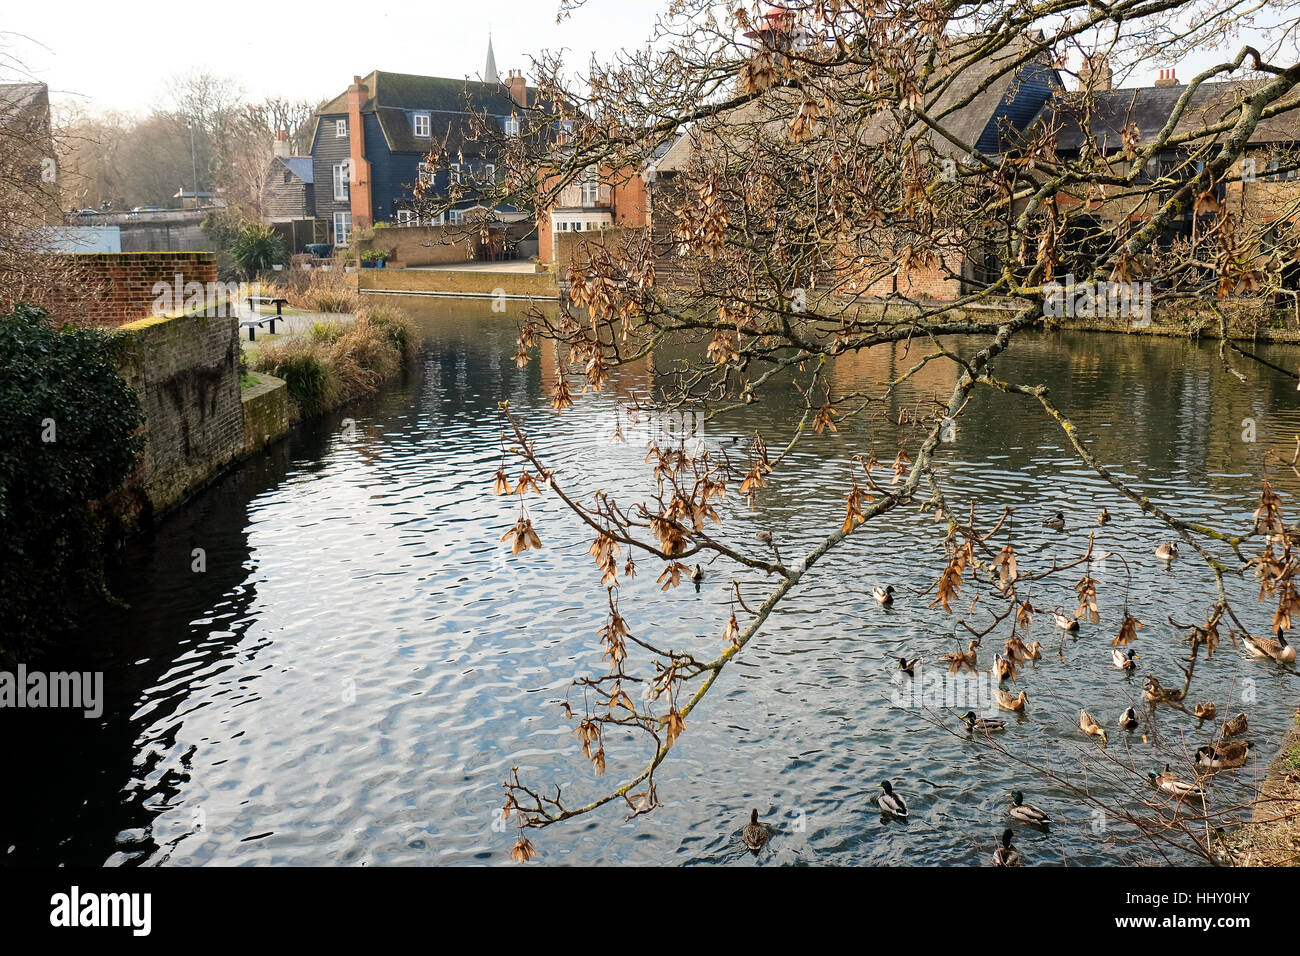 The view of a canal system in Hertford, England Stock Photo